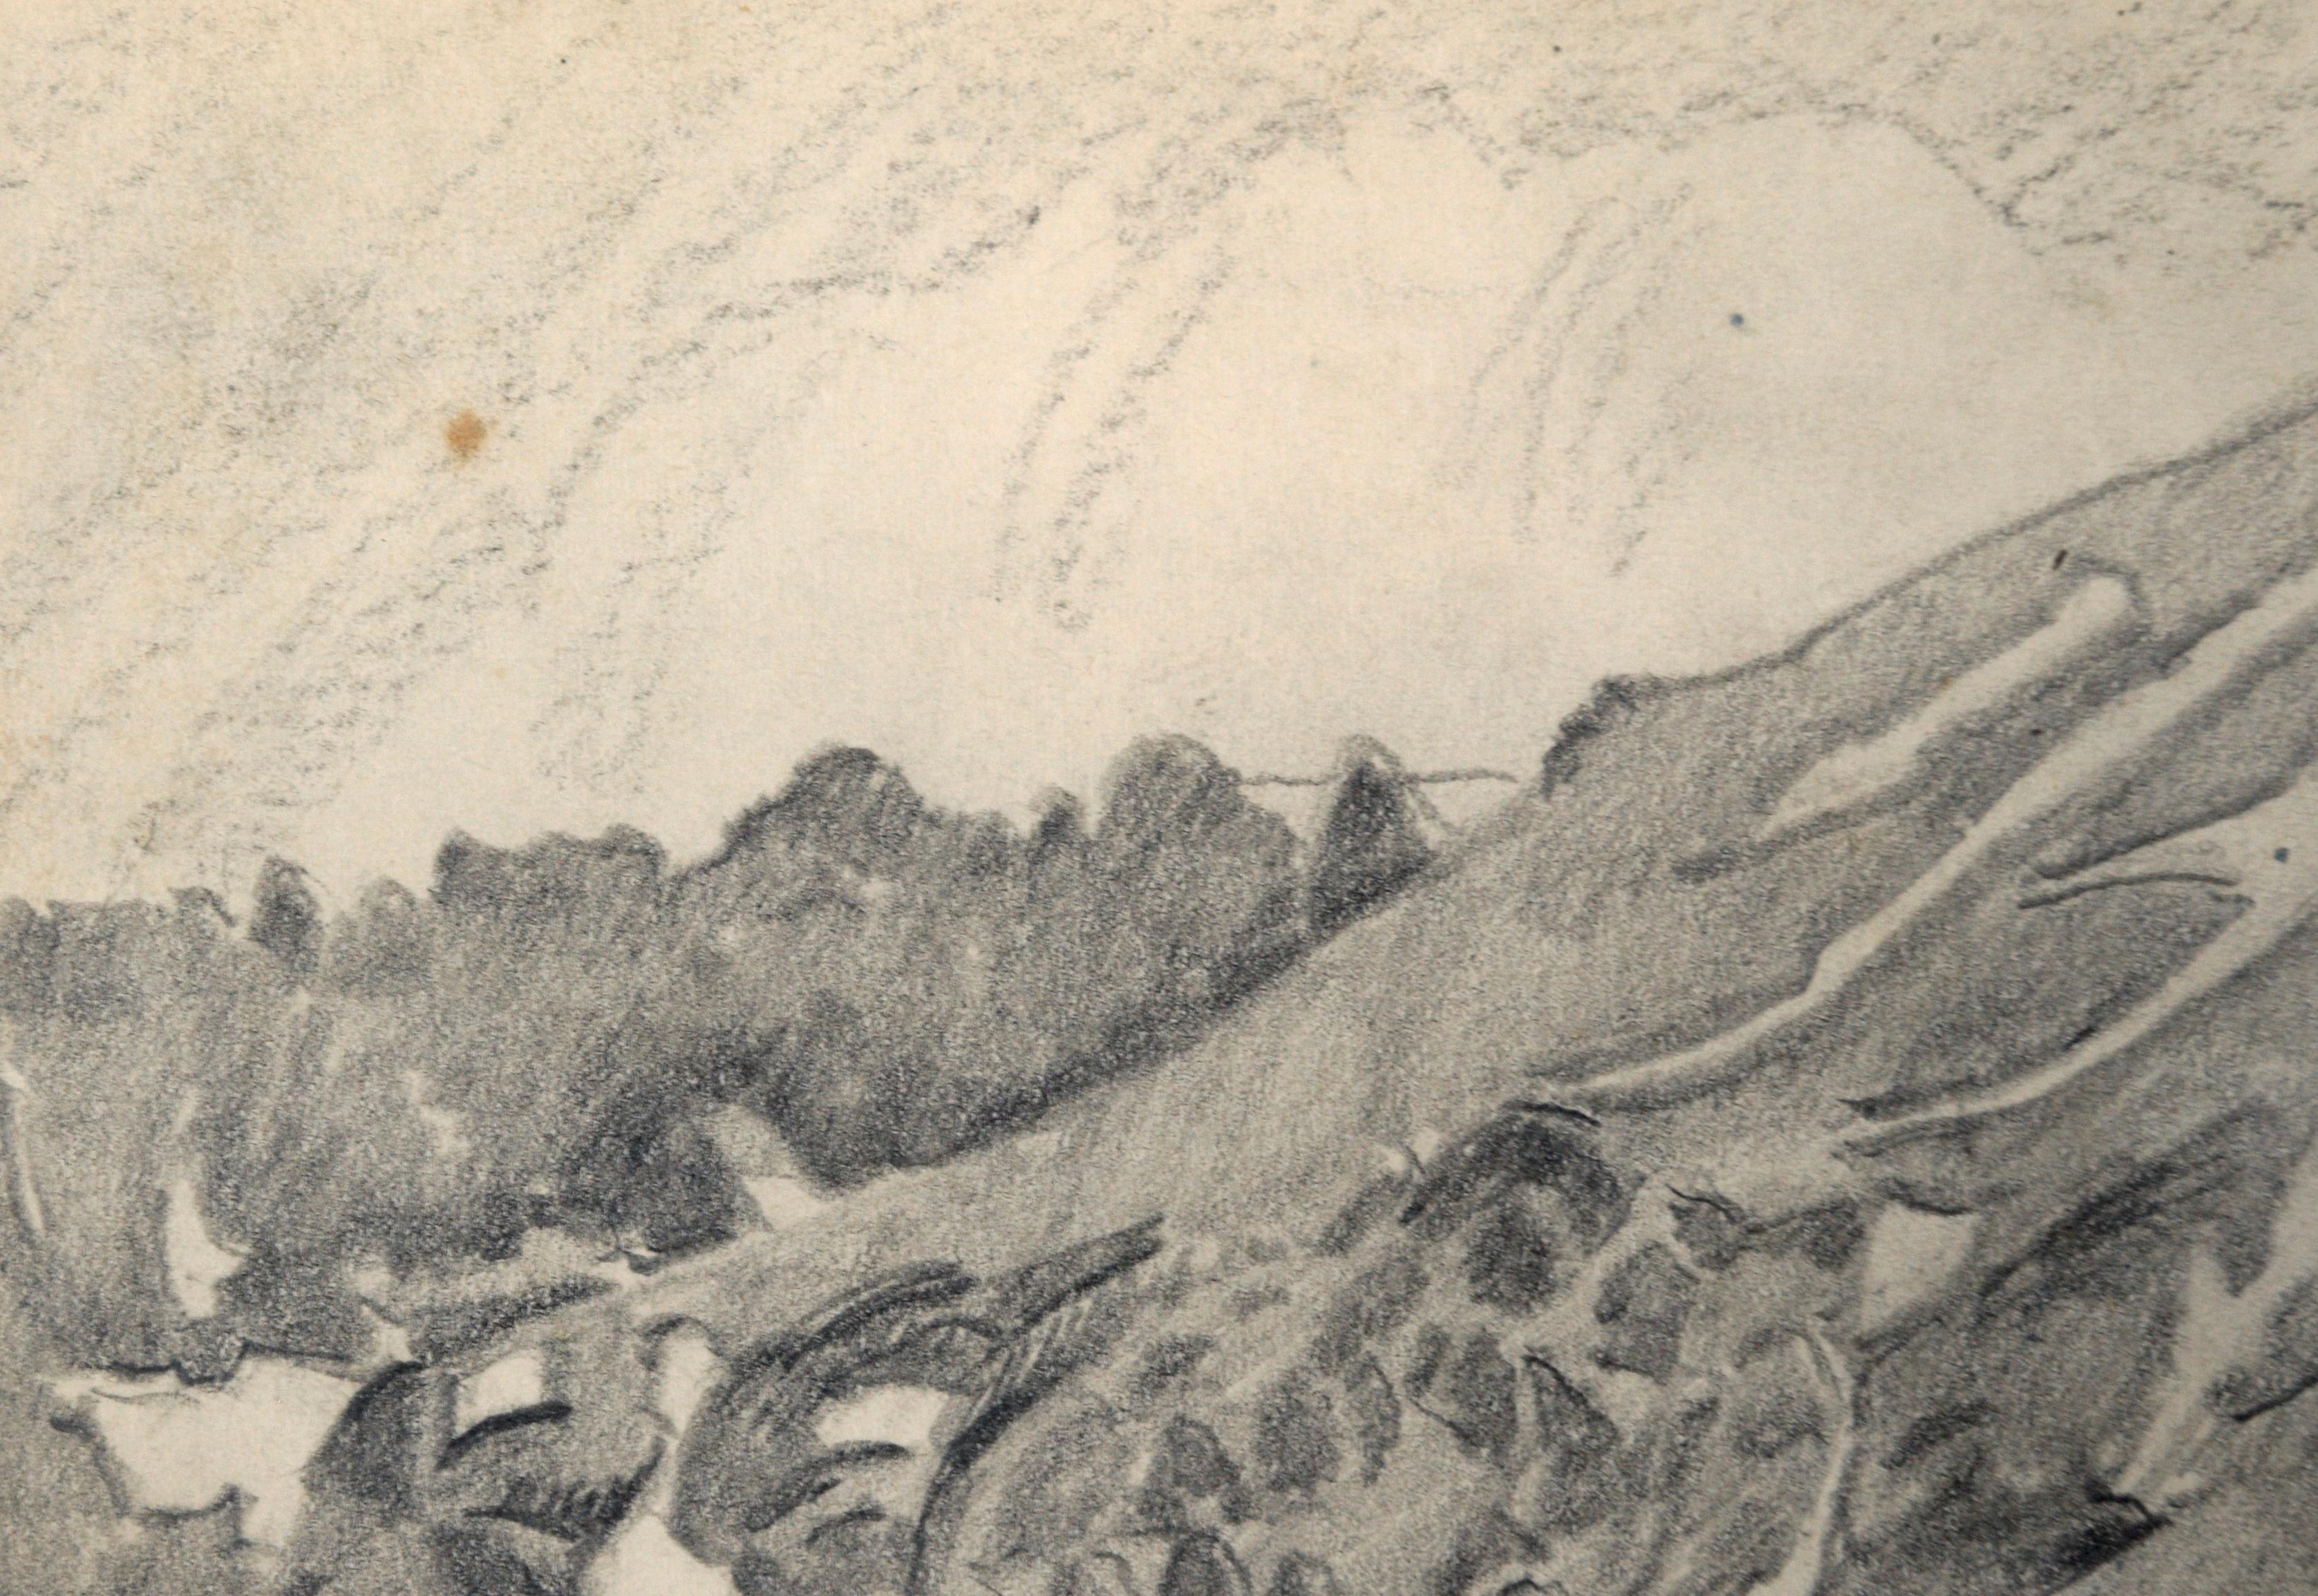 San Gabriel Mountain Landscape in Black and White - Graphite Pencil on Paper
Detailed mountain landscape by Ralph Holmes (American, 1876-1963). 

Signed lower right corner 